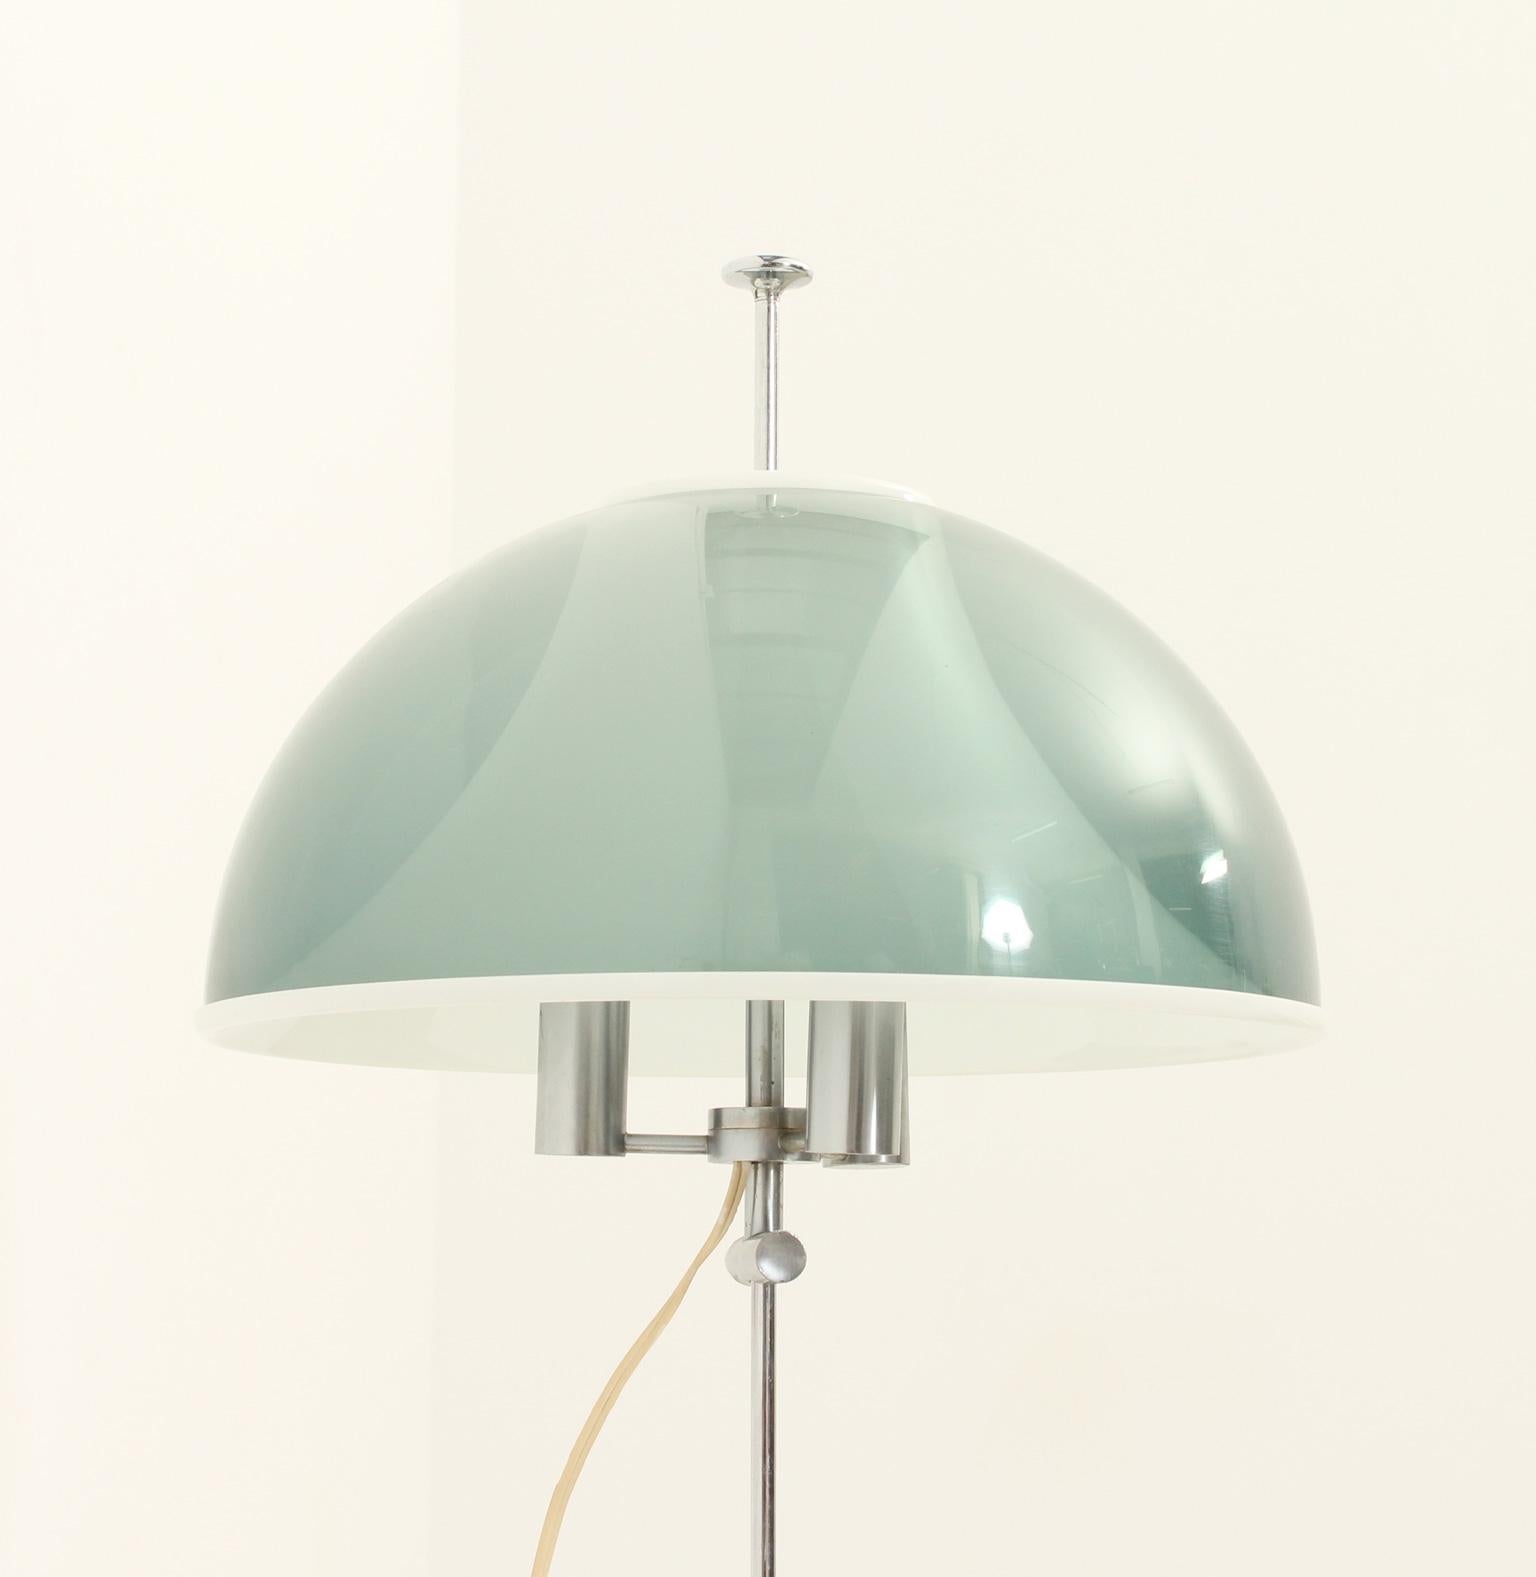 Elio Martinelli Adjustable Table Lamp for Metalarte, 1962 In Good Condition For Sale In Barcelona, ES